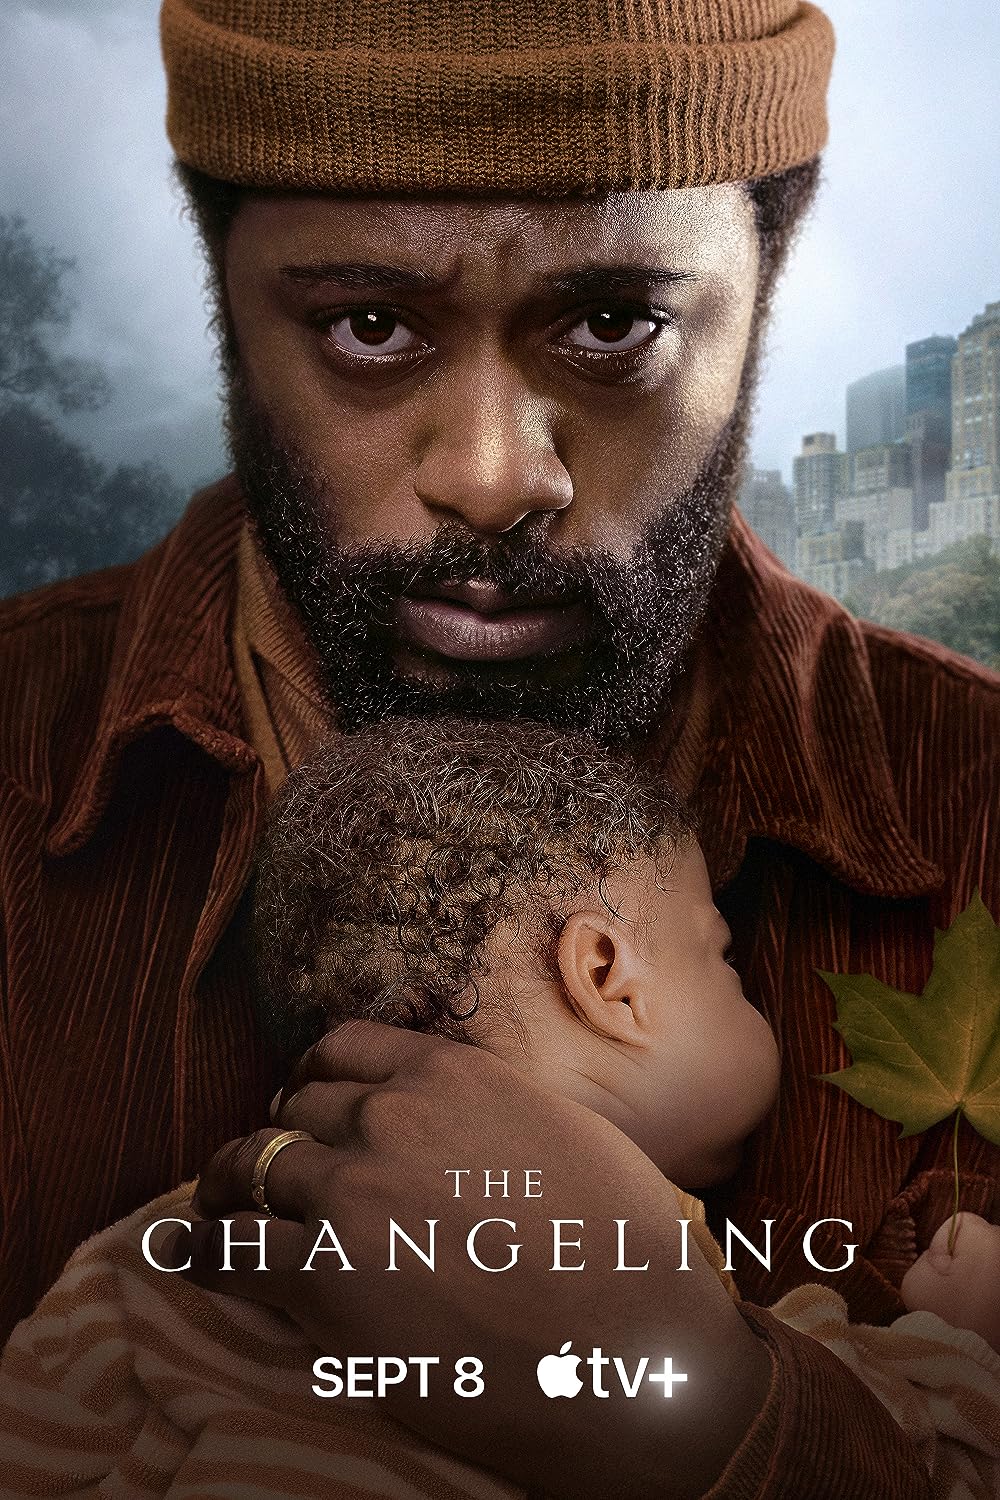 Poster Phim The Changeling Phần 1 (The Changeling Season 1)